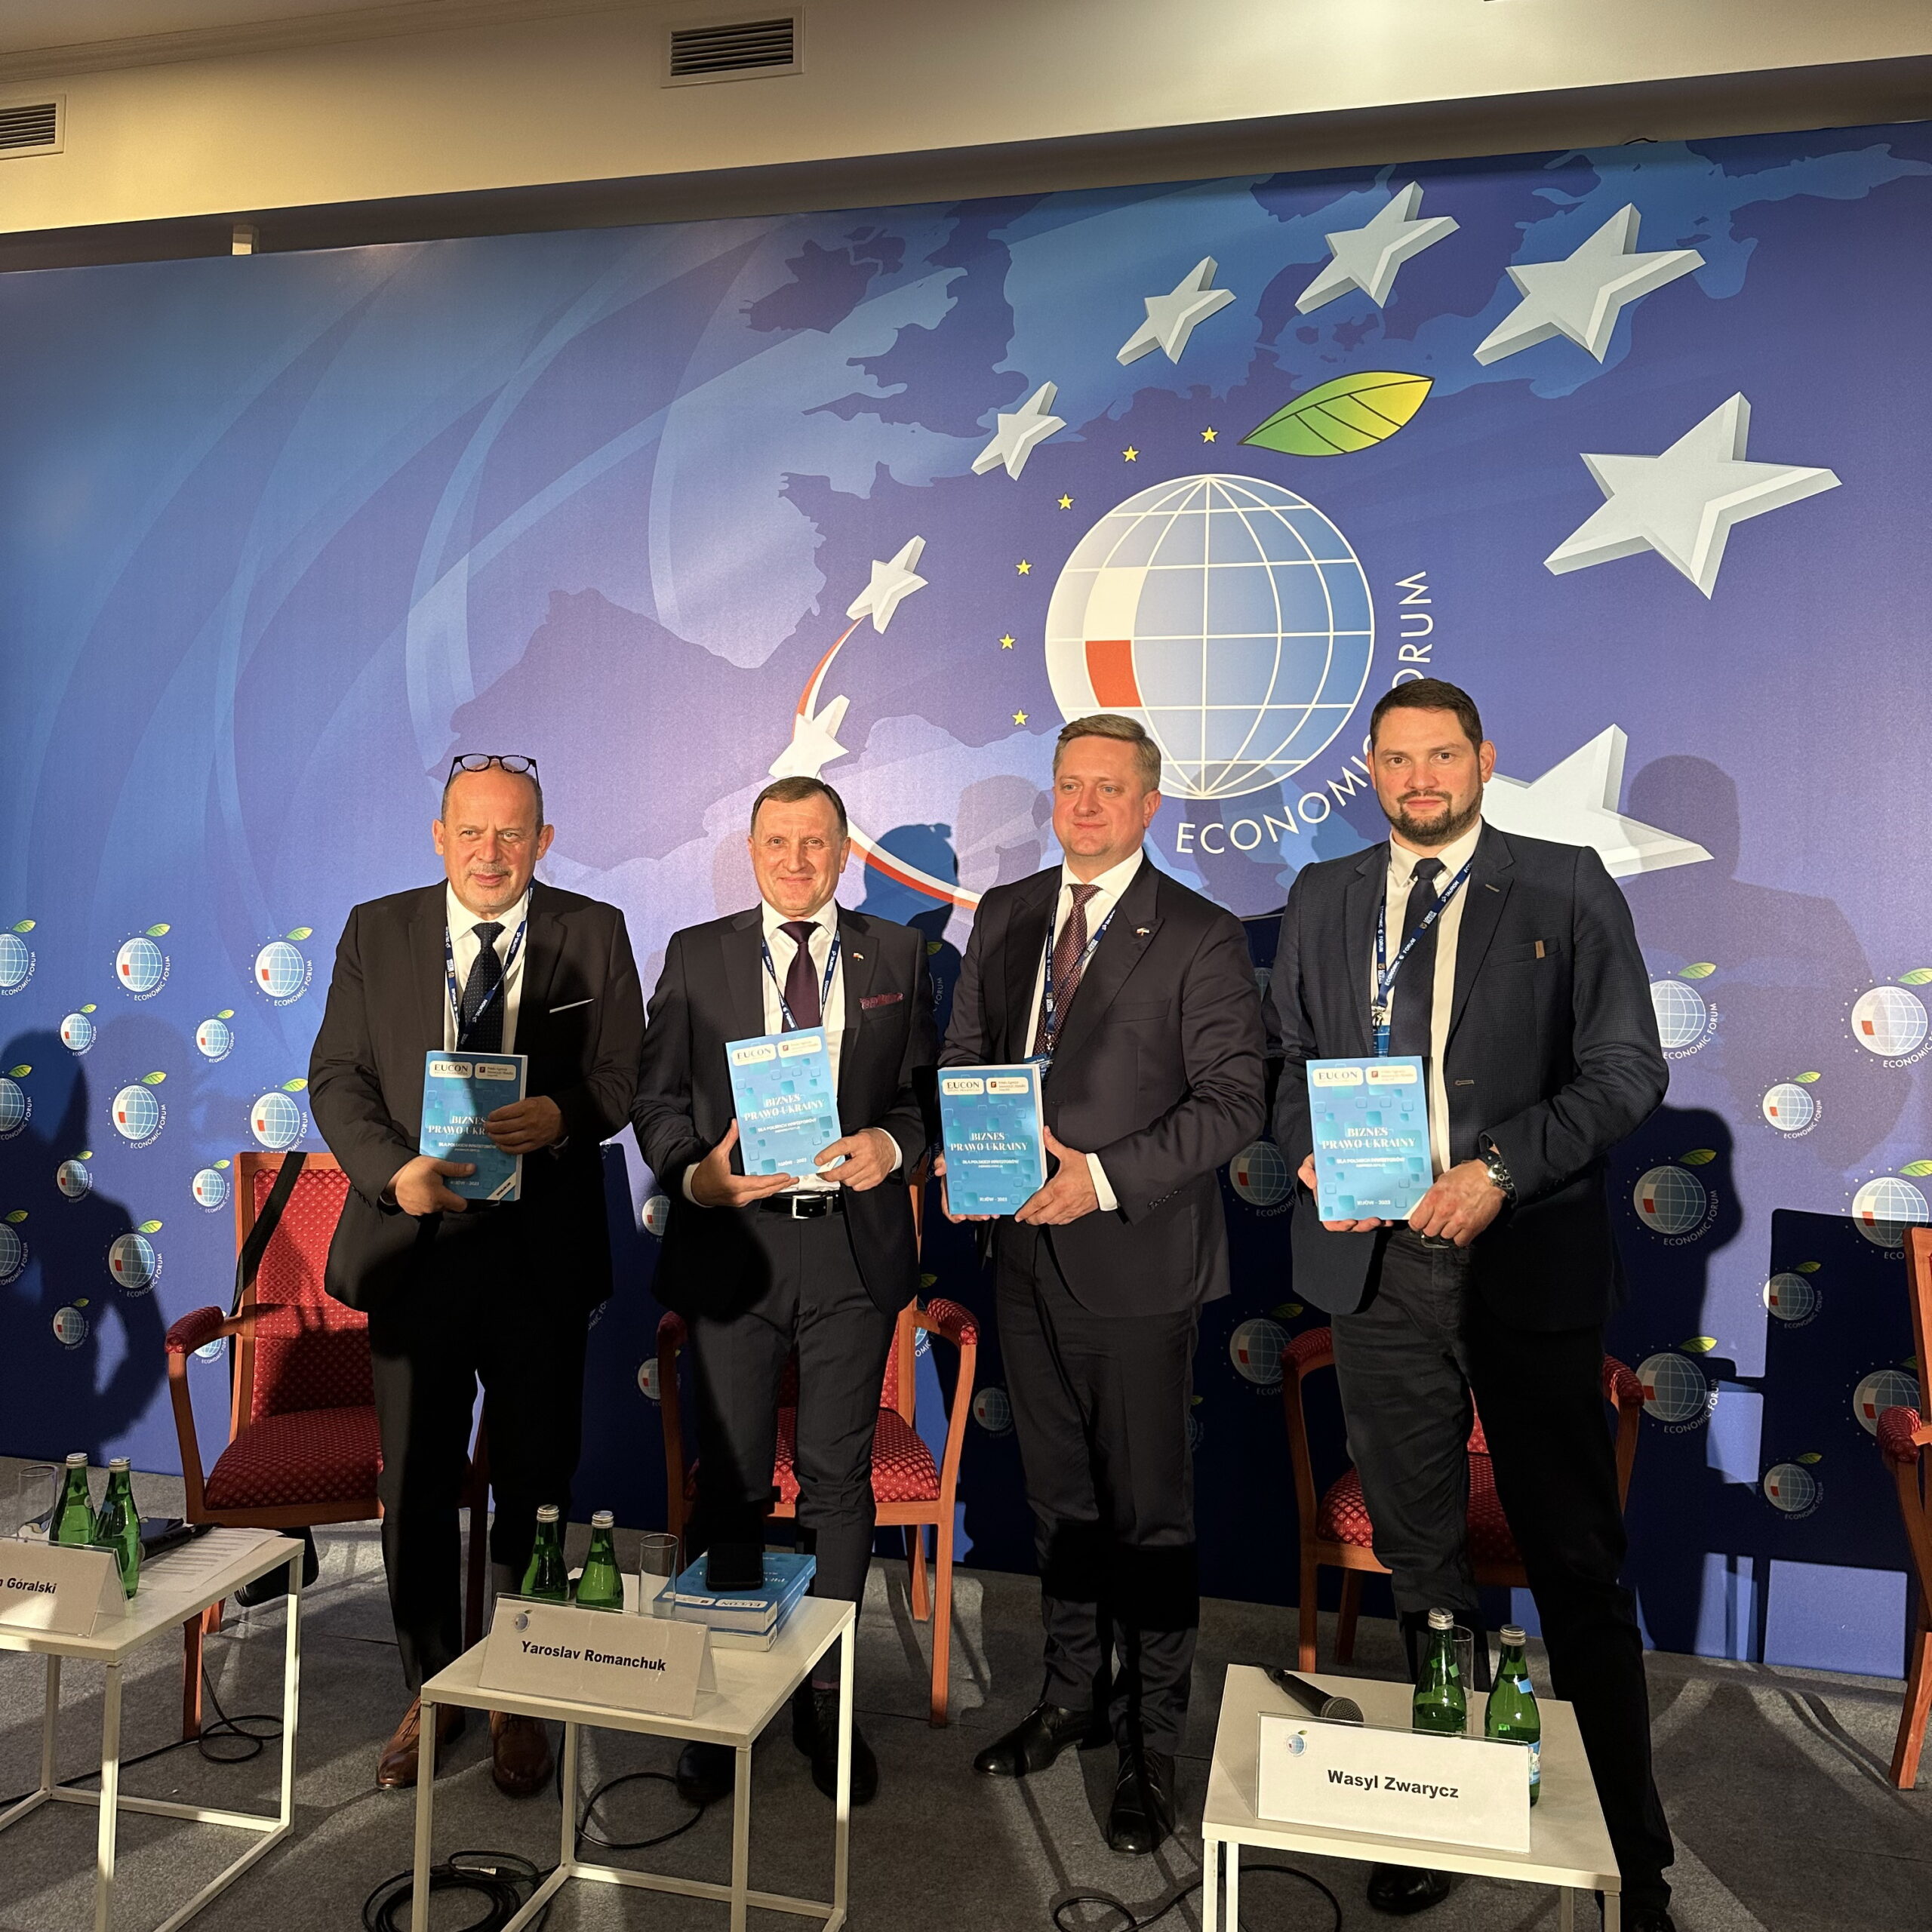 The presentation of the book “Business Law of Ukraine for Polish Investors” took place in Karpacz at the 32nd Economic Forum